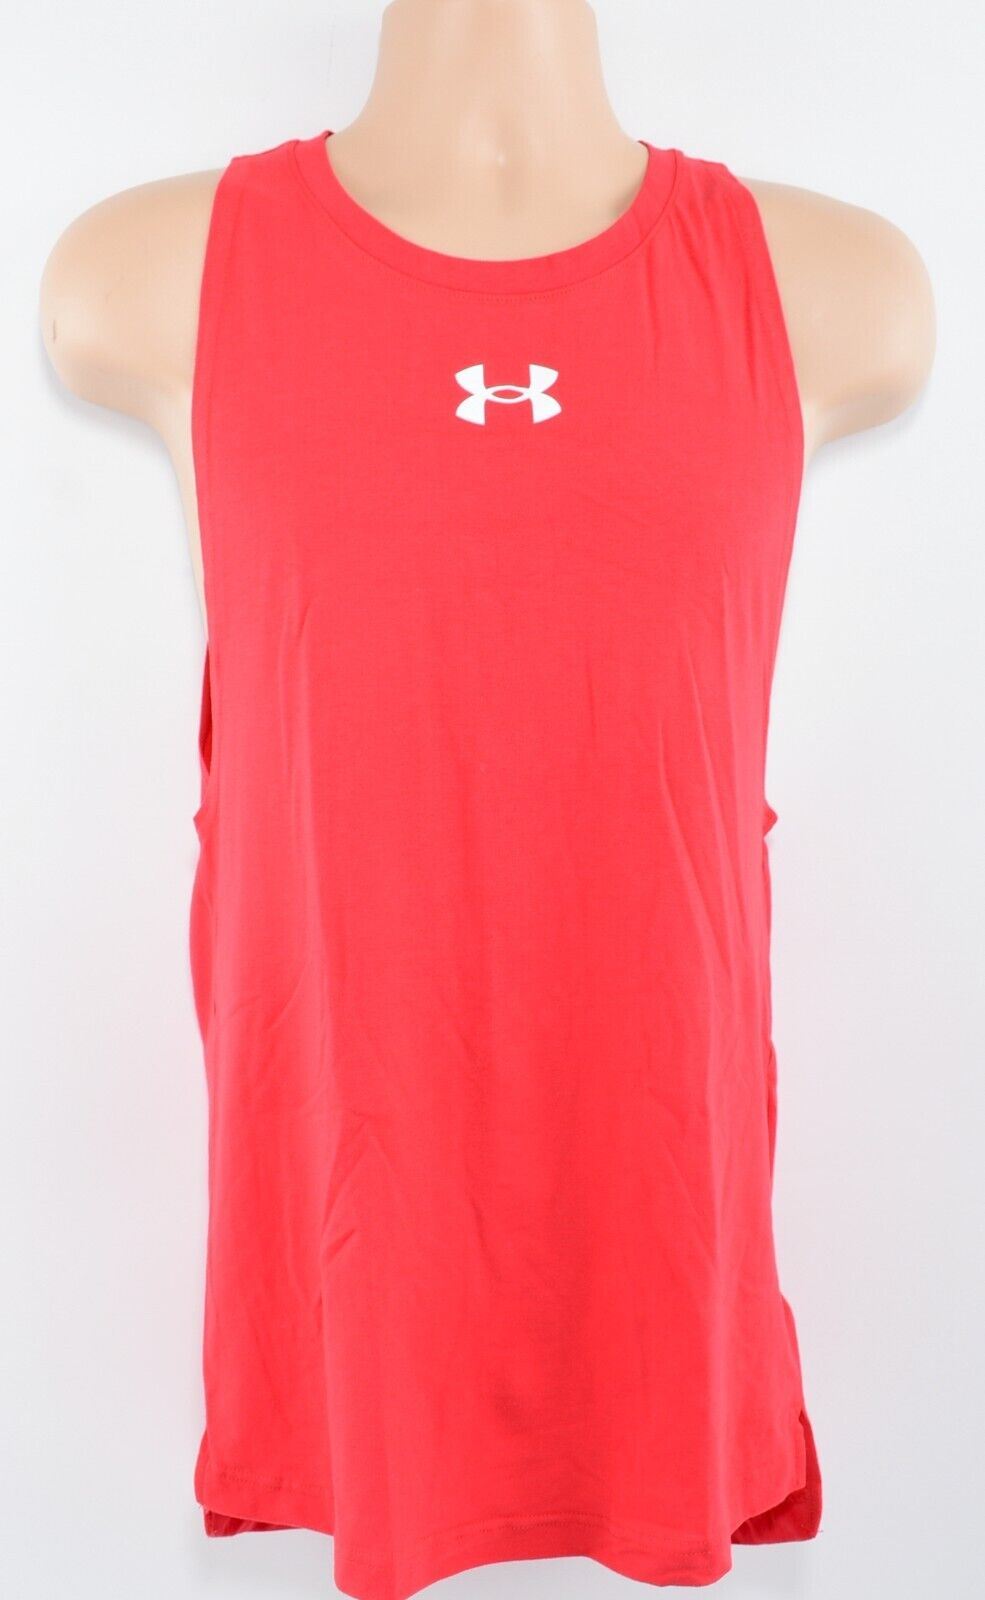 UNDER ARMOUR Mens Baseline Cotton Tank Top, Vest Top, Red, size SMALL